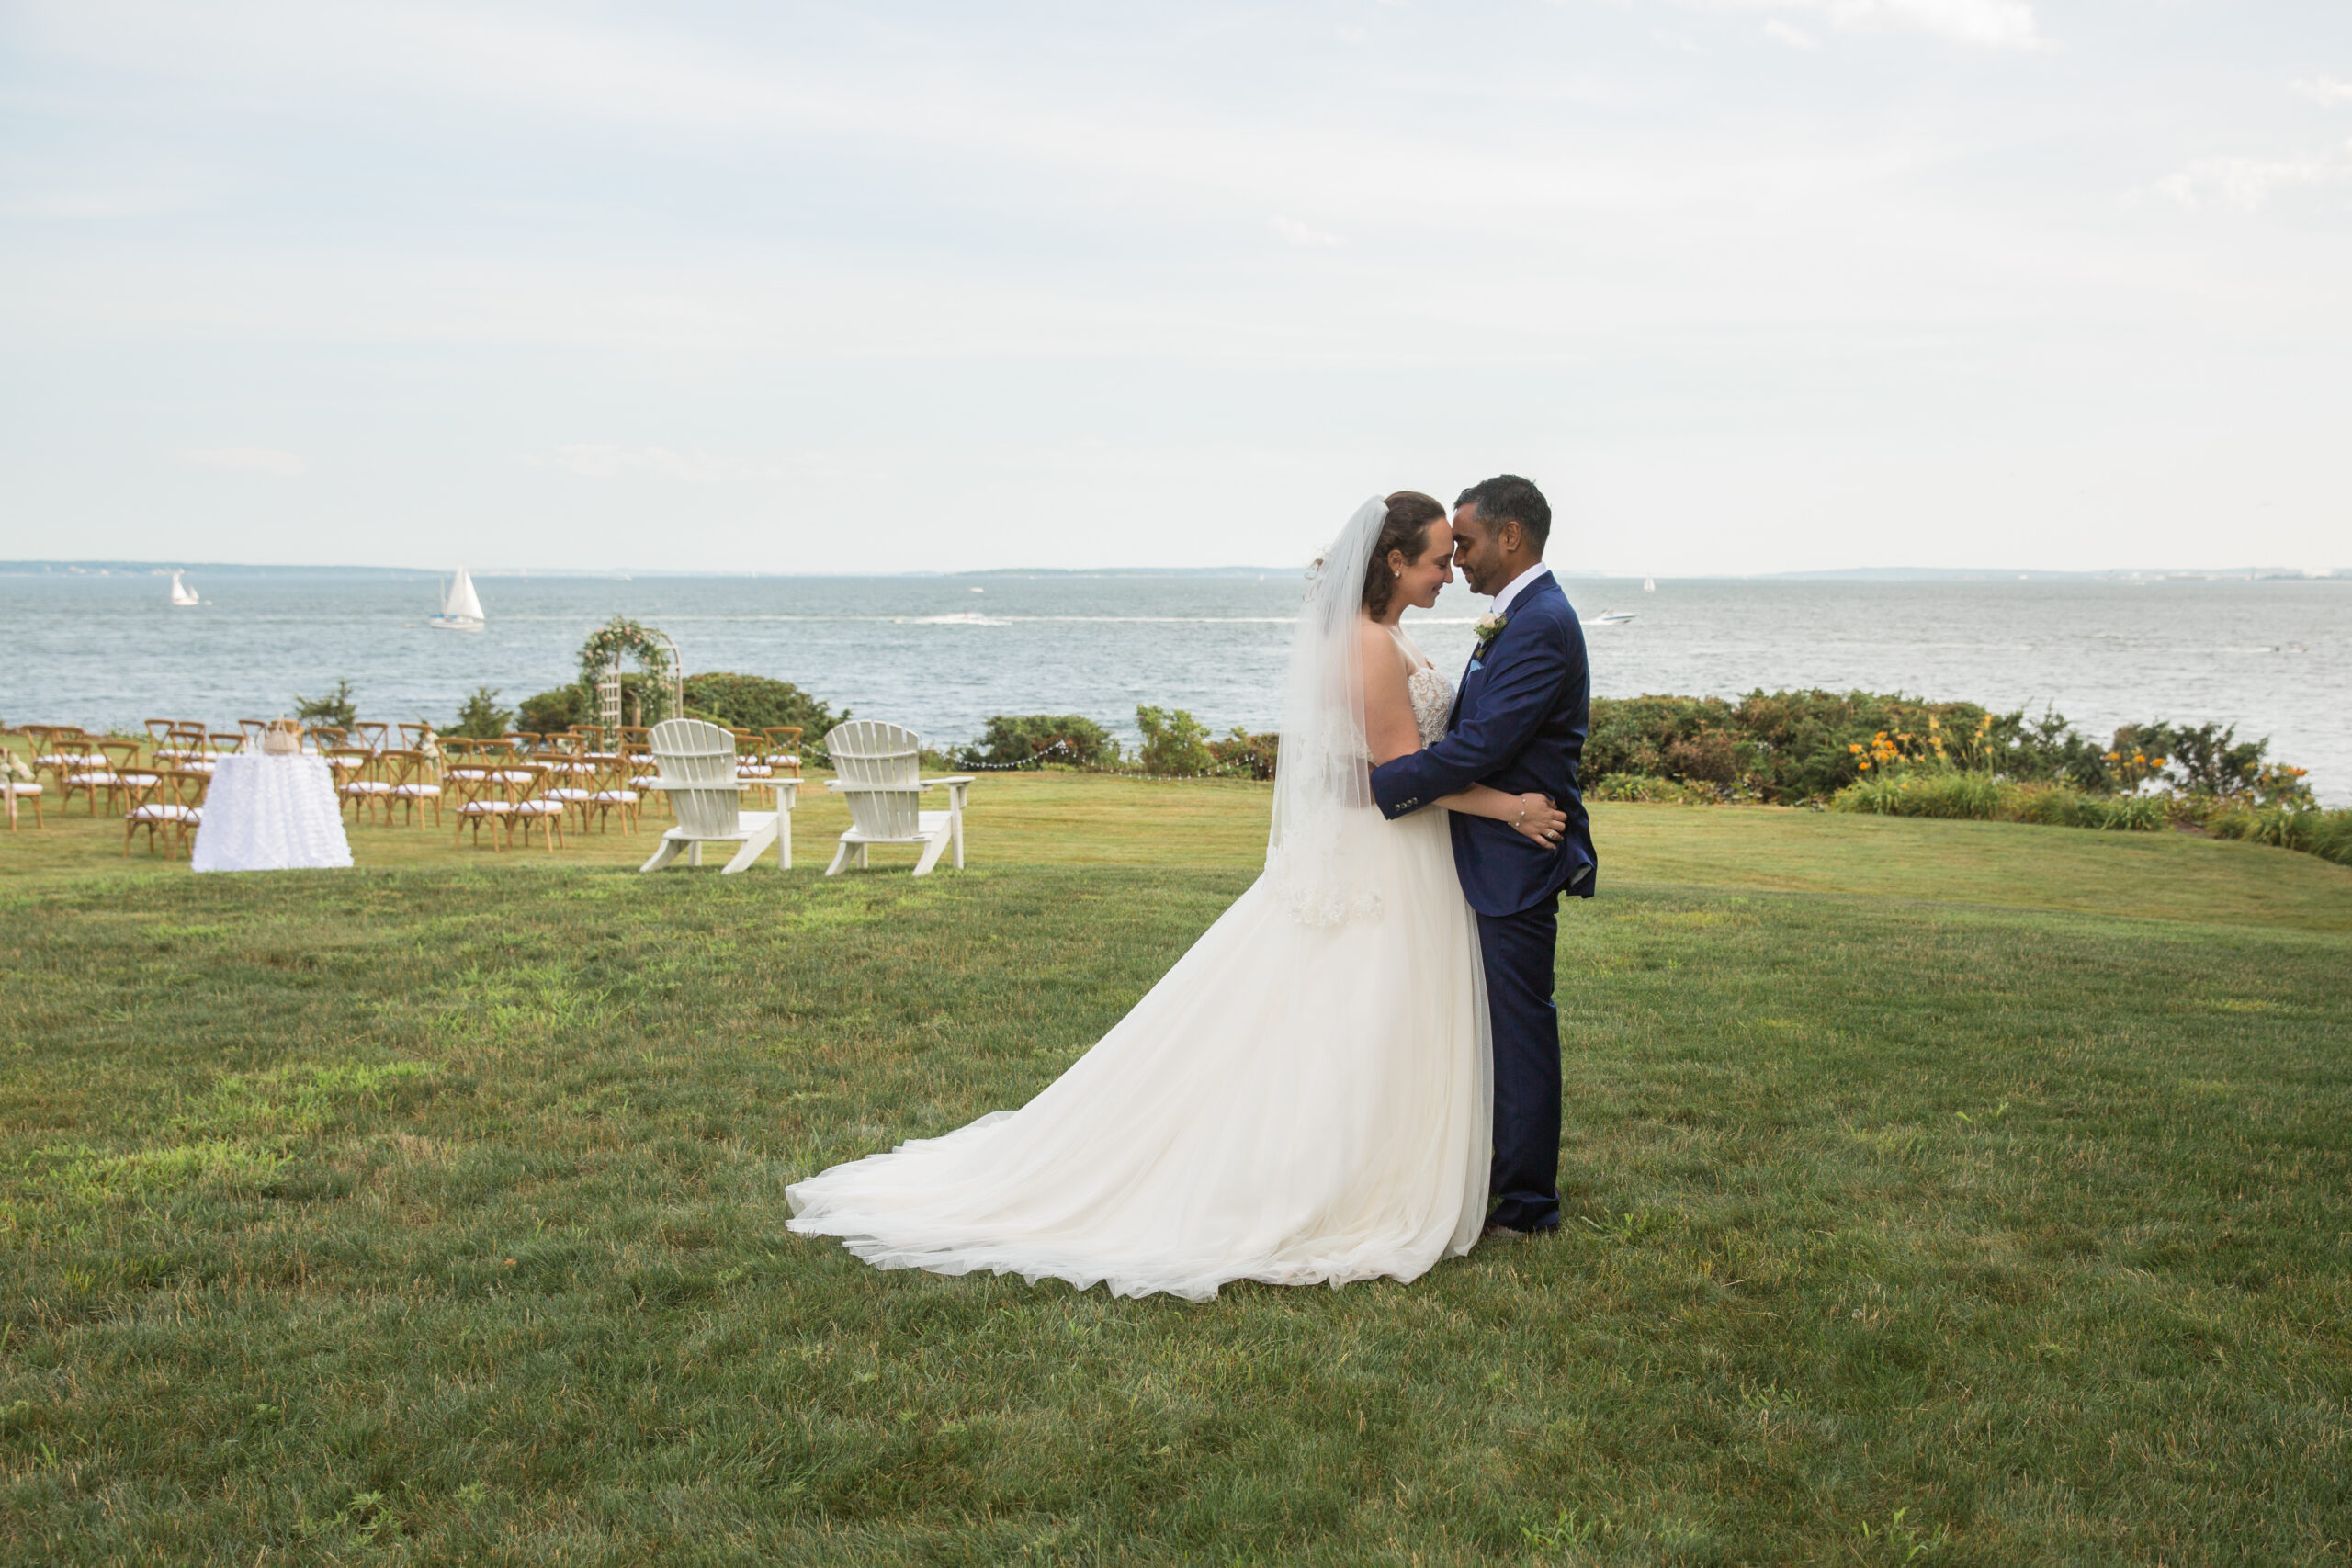 A Bride and Groom embrace on the lawn of their water front wedding.